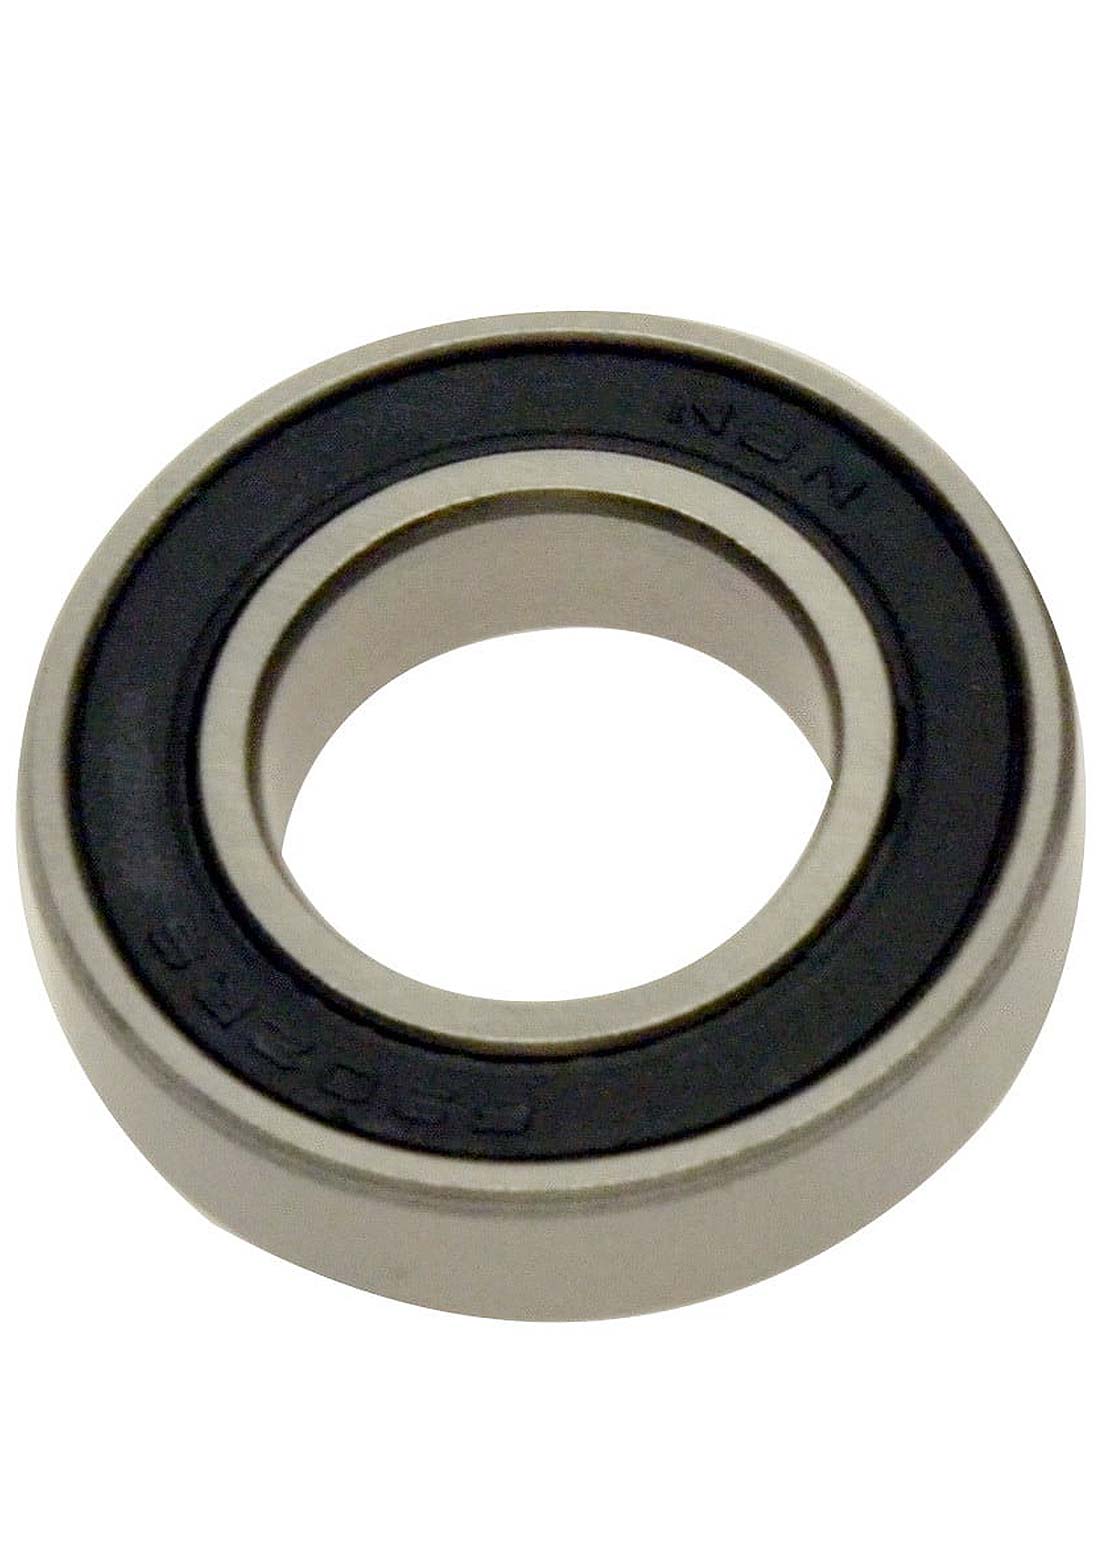 Norco 6902 Max Steel Bearing 15x28x7mm